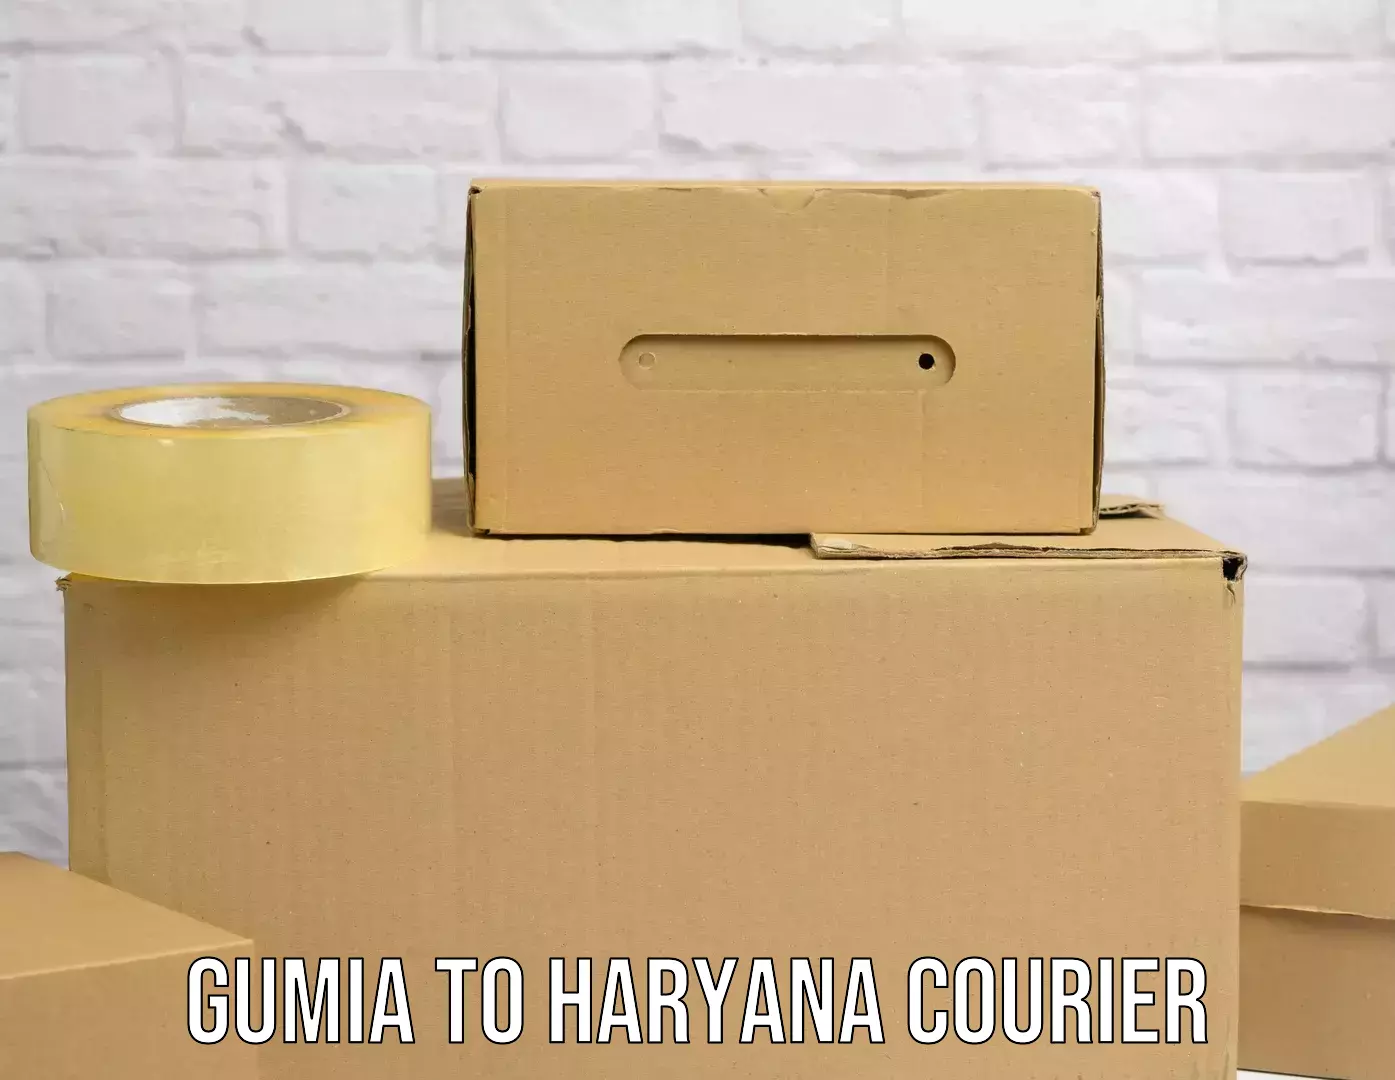 Residential courier service Gumia to Chirya